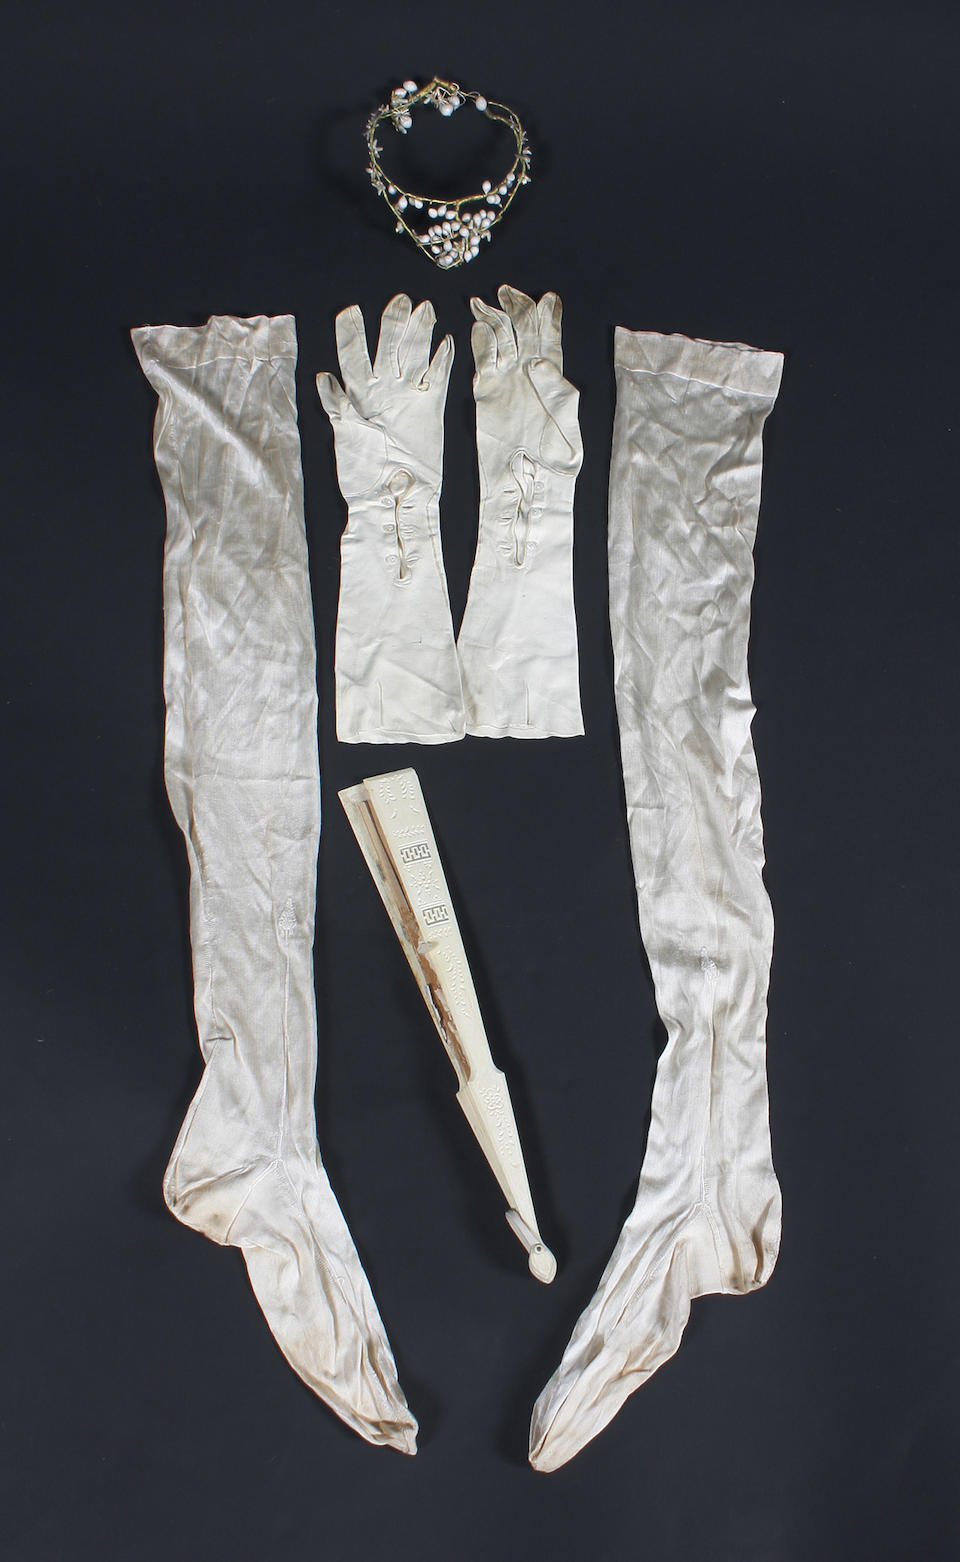 Bonhams : Late 19th century wedding outfits for bride and groom, 1880s